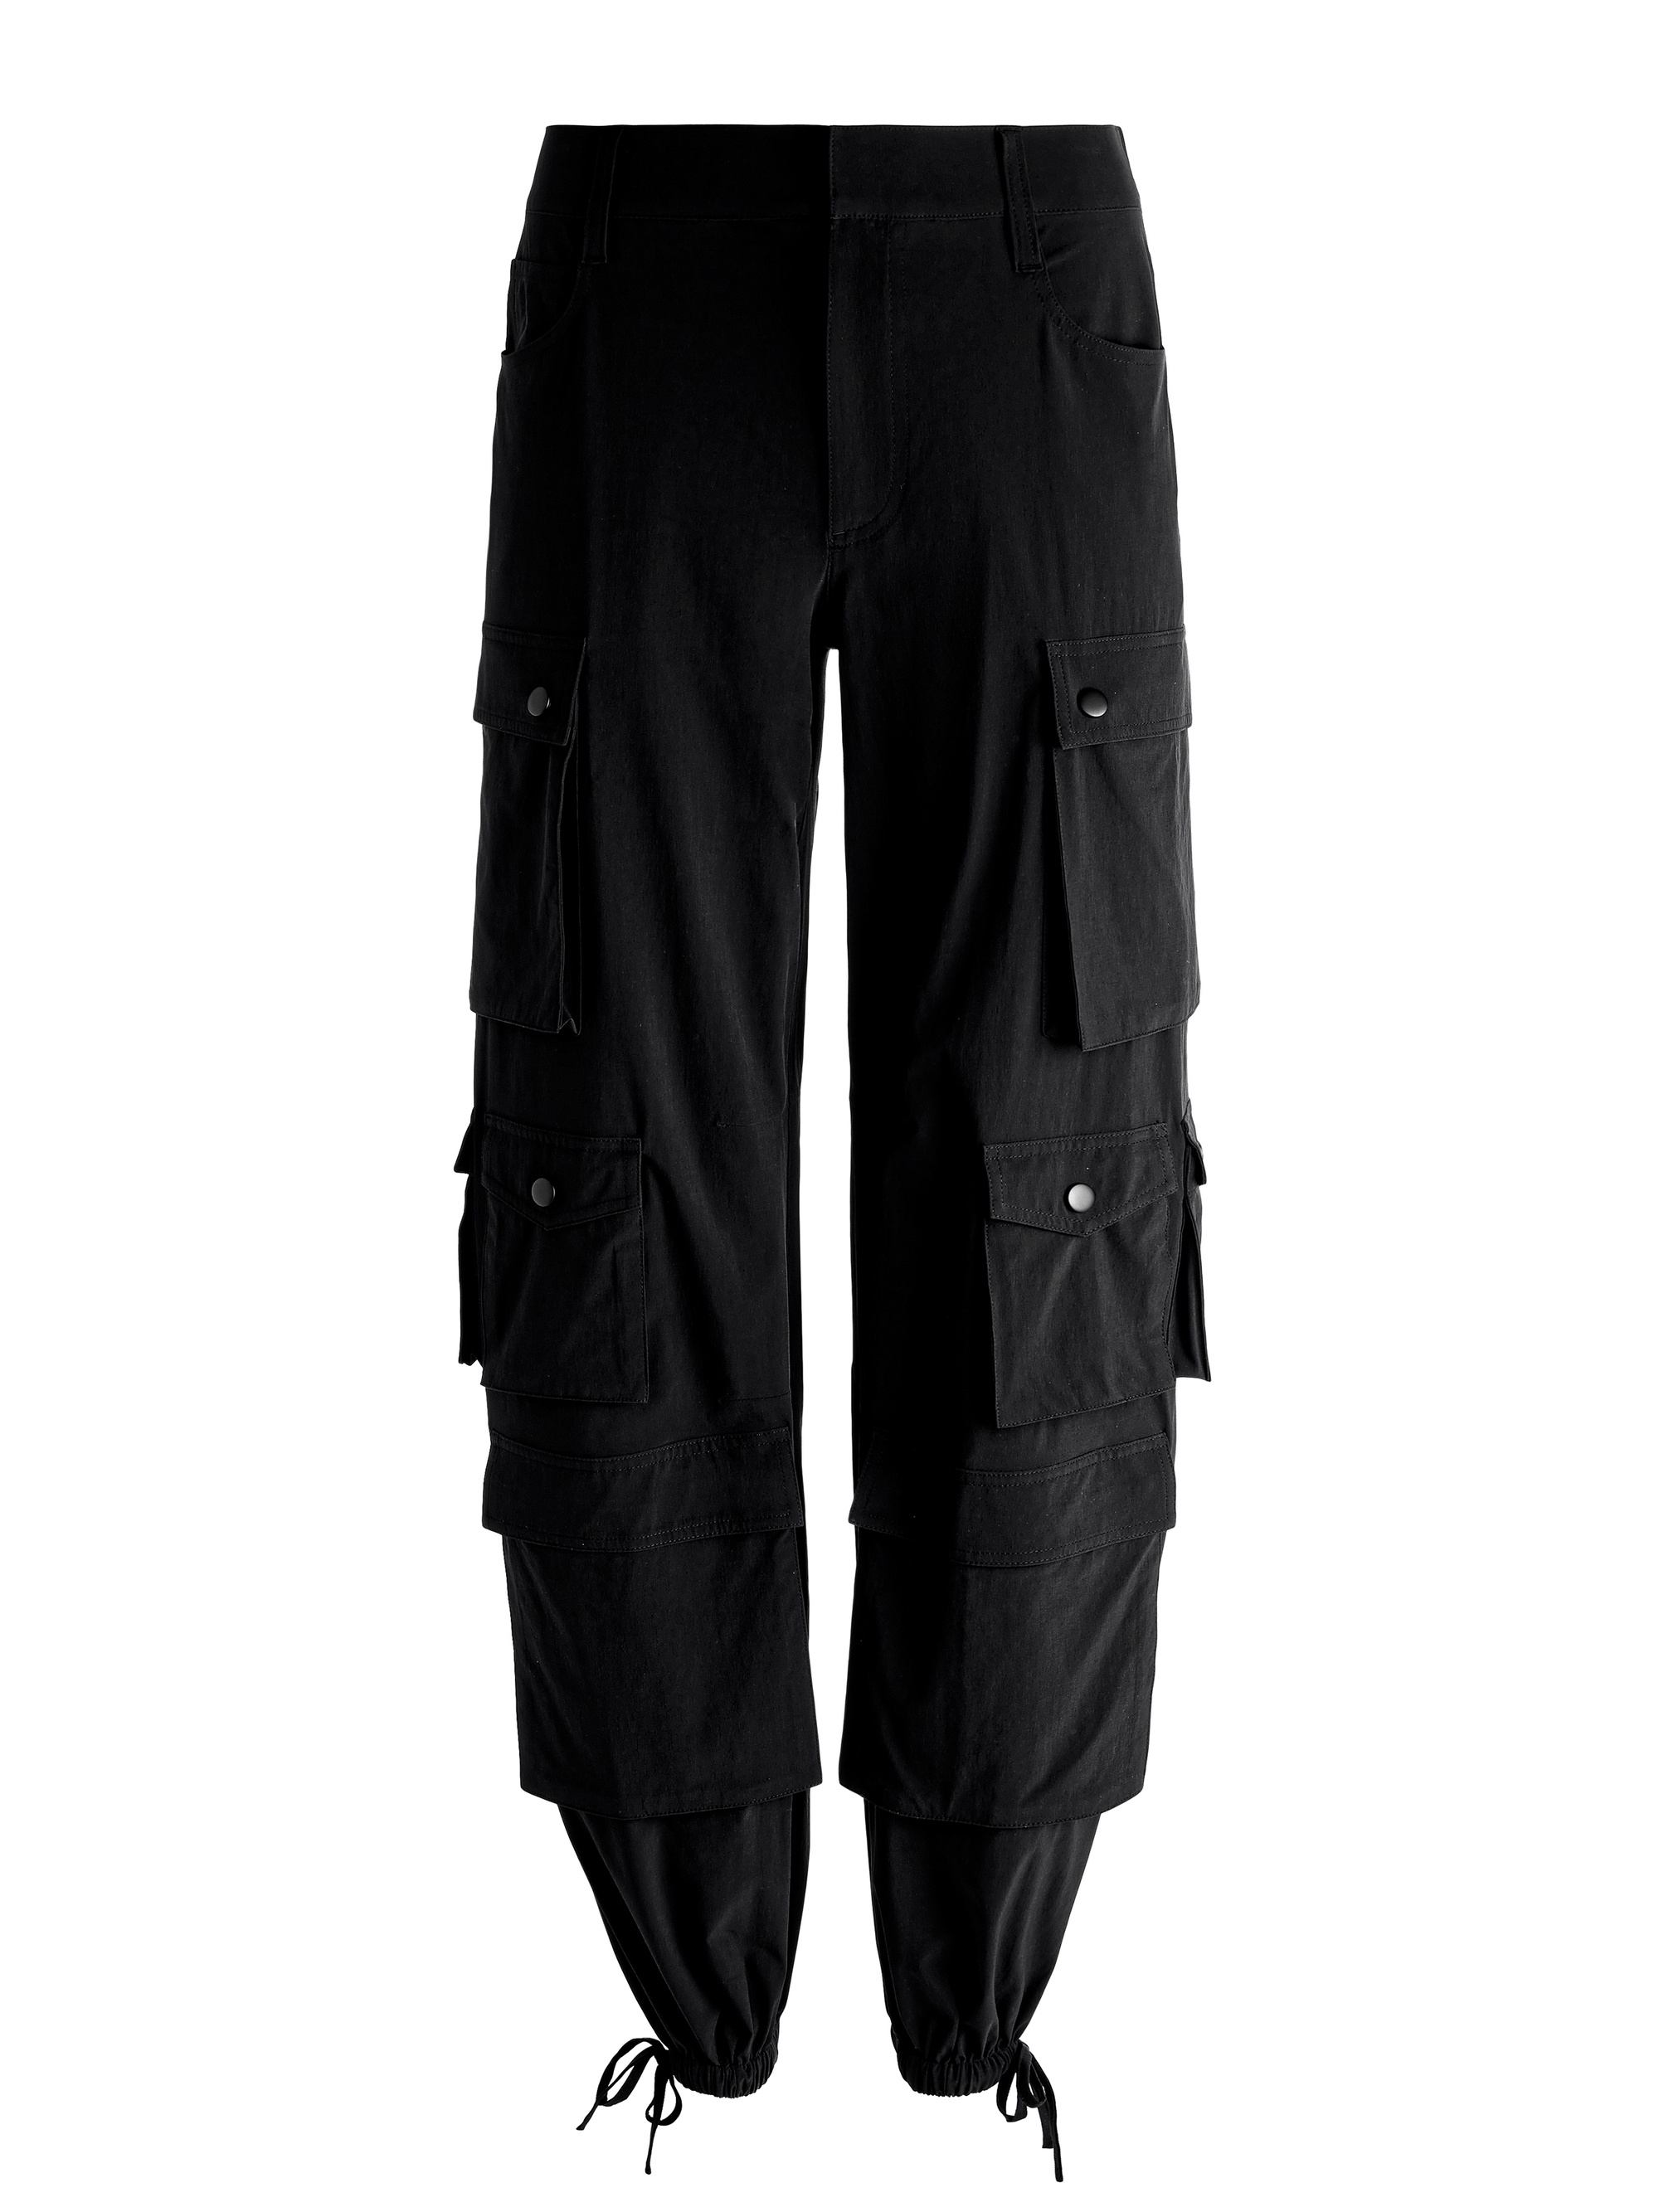 OLYMPIA MID RISE BAGGY CARGO PANTS - 2